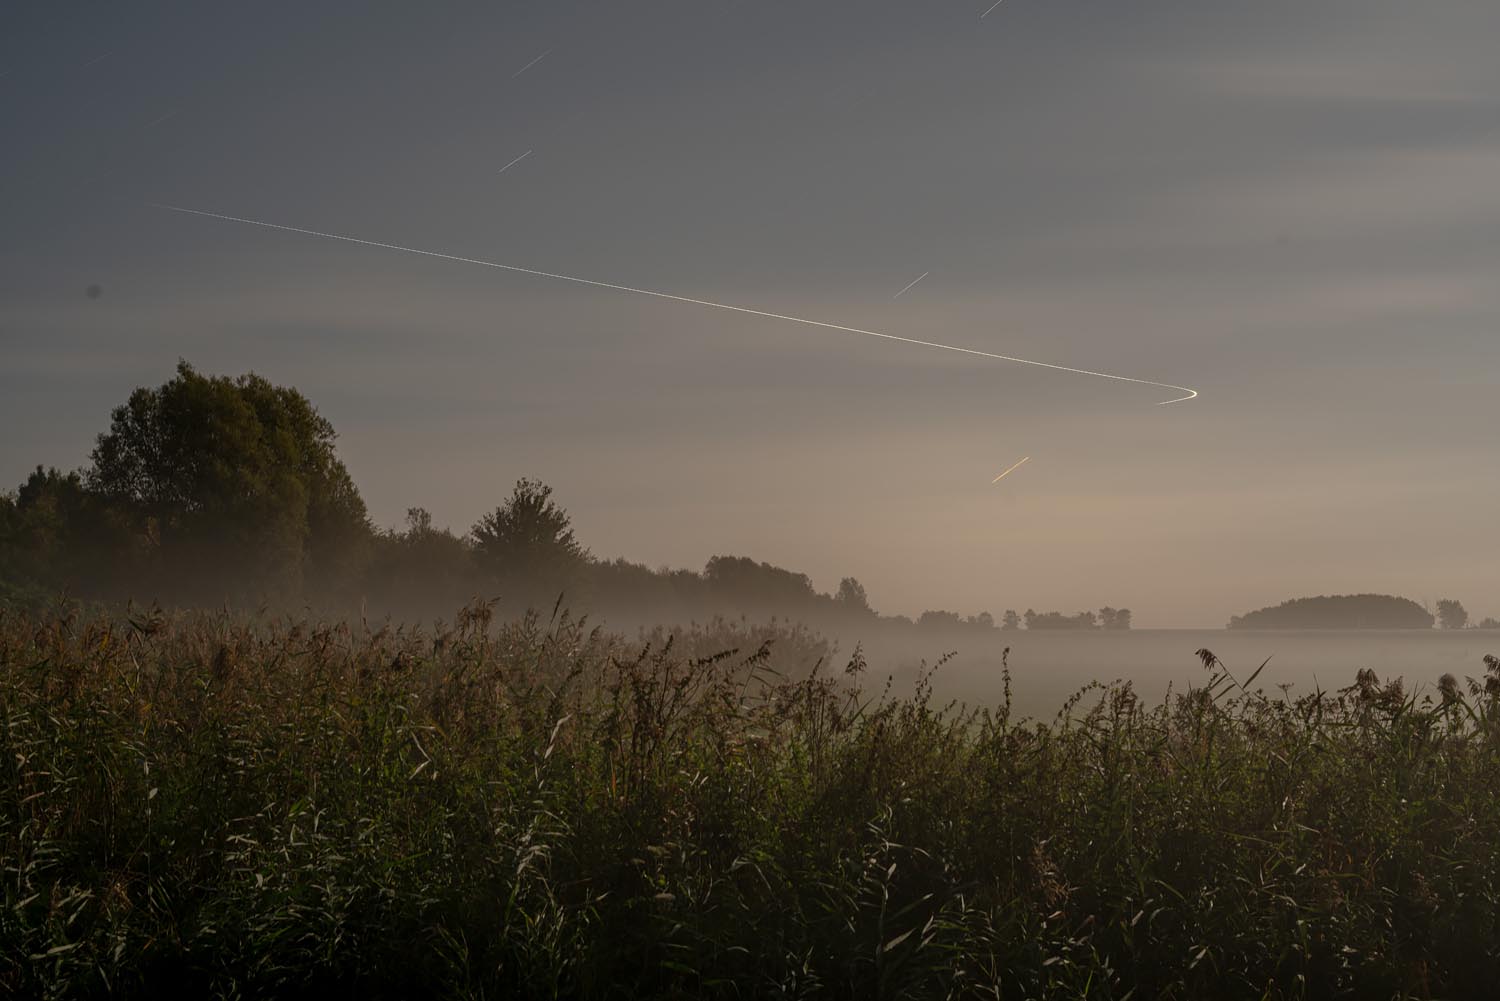 Sites at Risk of Climate Change: Night Landscape Photographs in The Netherlands, Steve Giovinco, Crops Corn in Fog, with Plane Light in Sky, Flevoland